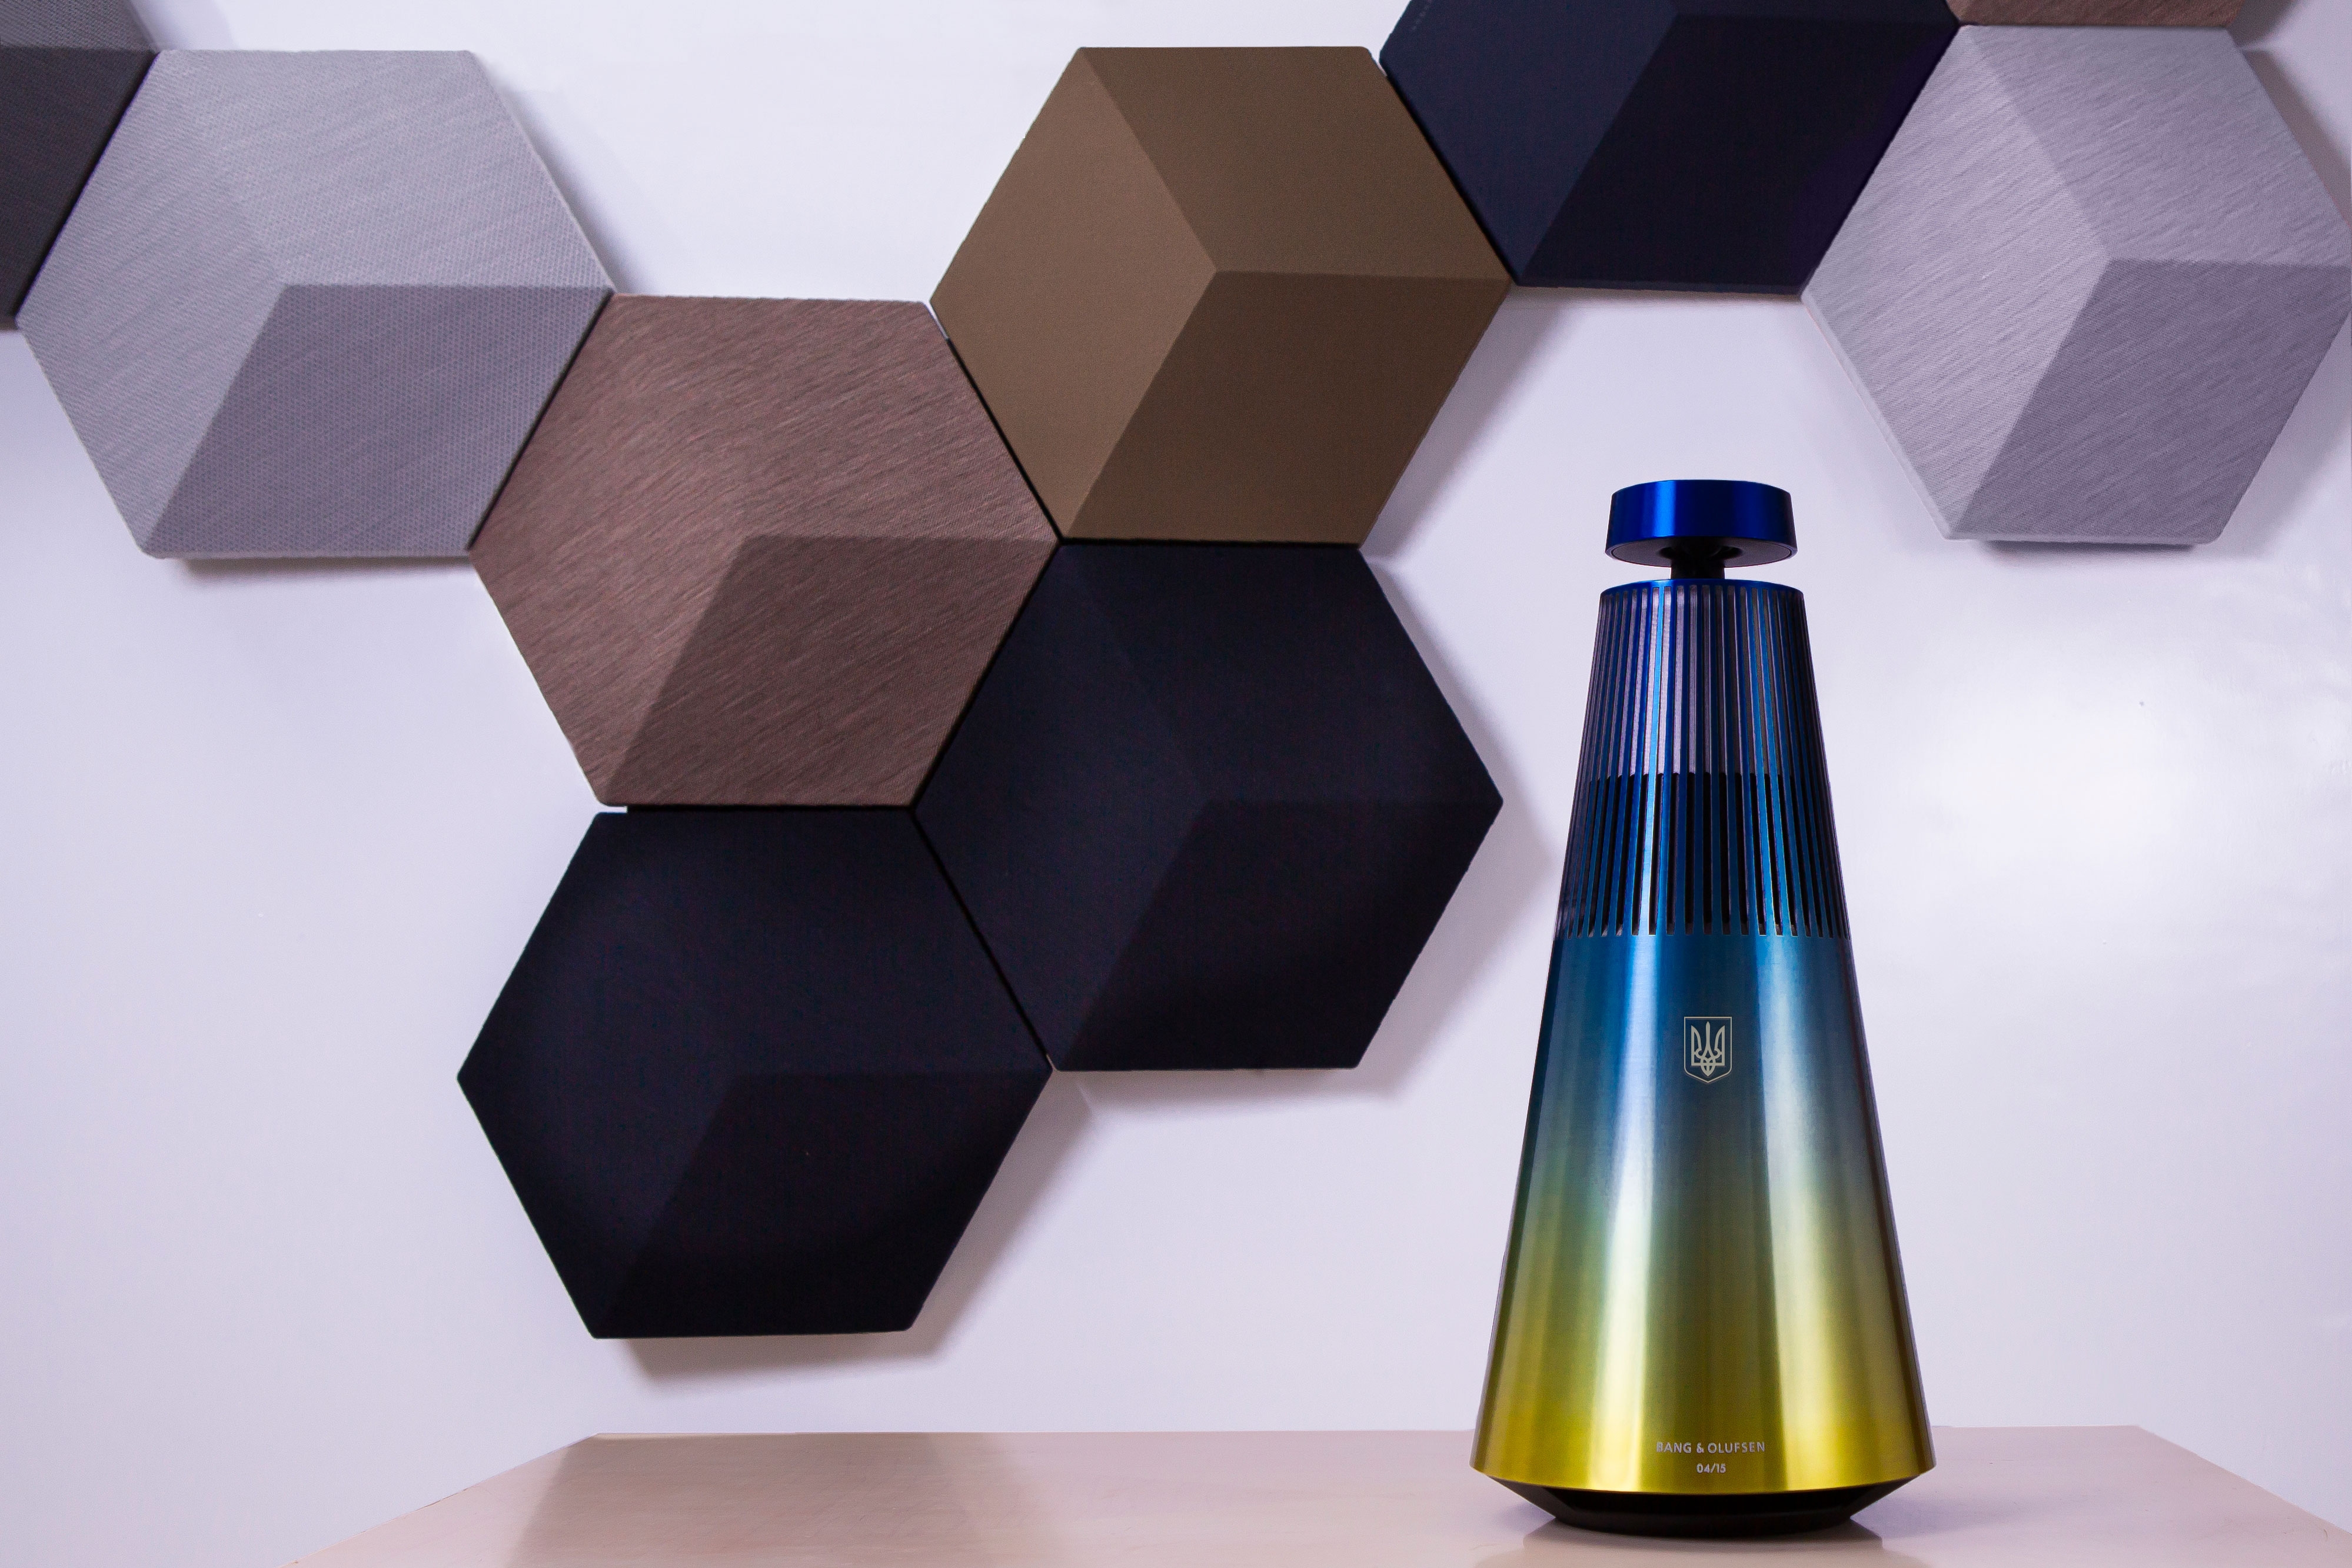 A Music Lover's Dream: Bang & Olufsen Speakers, in the Colors of